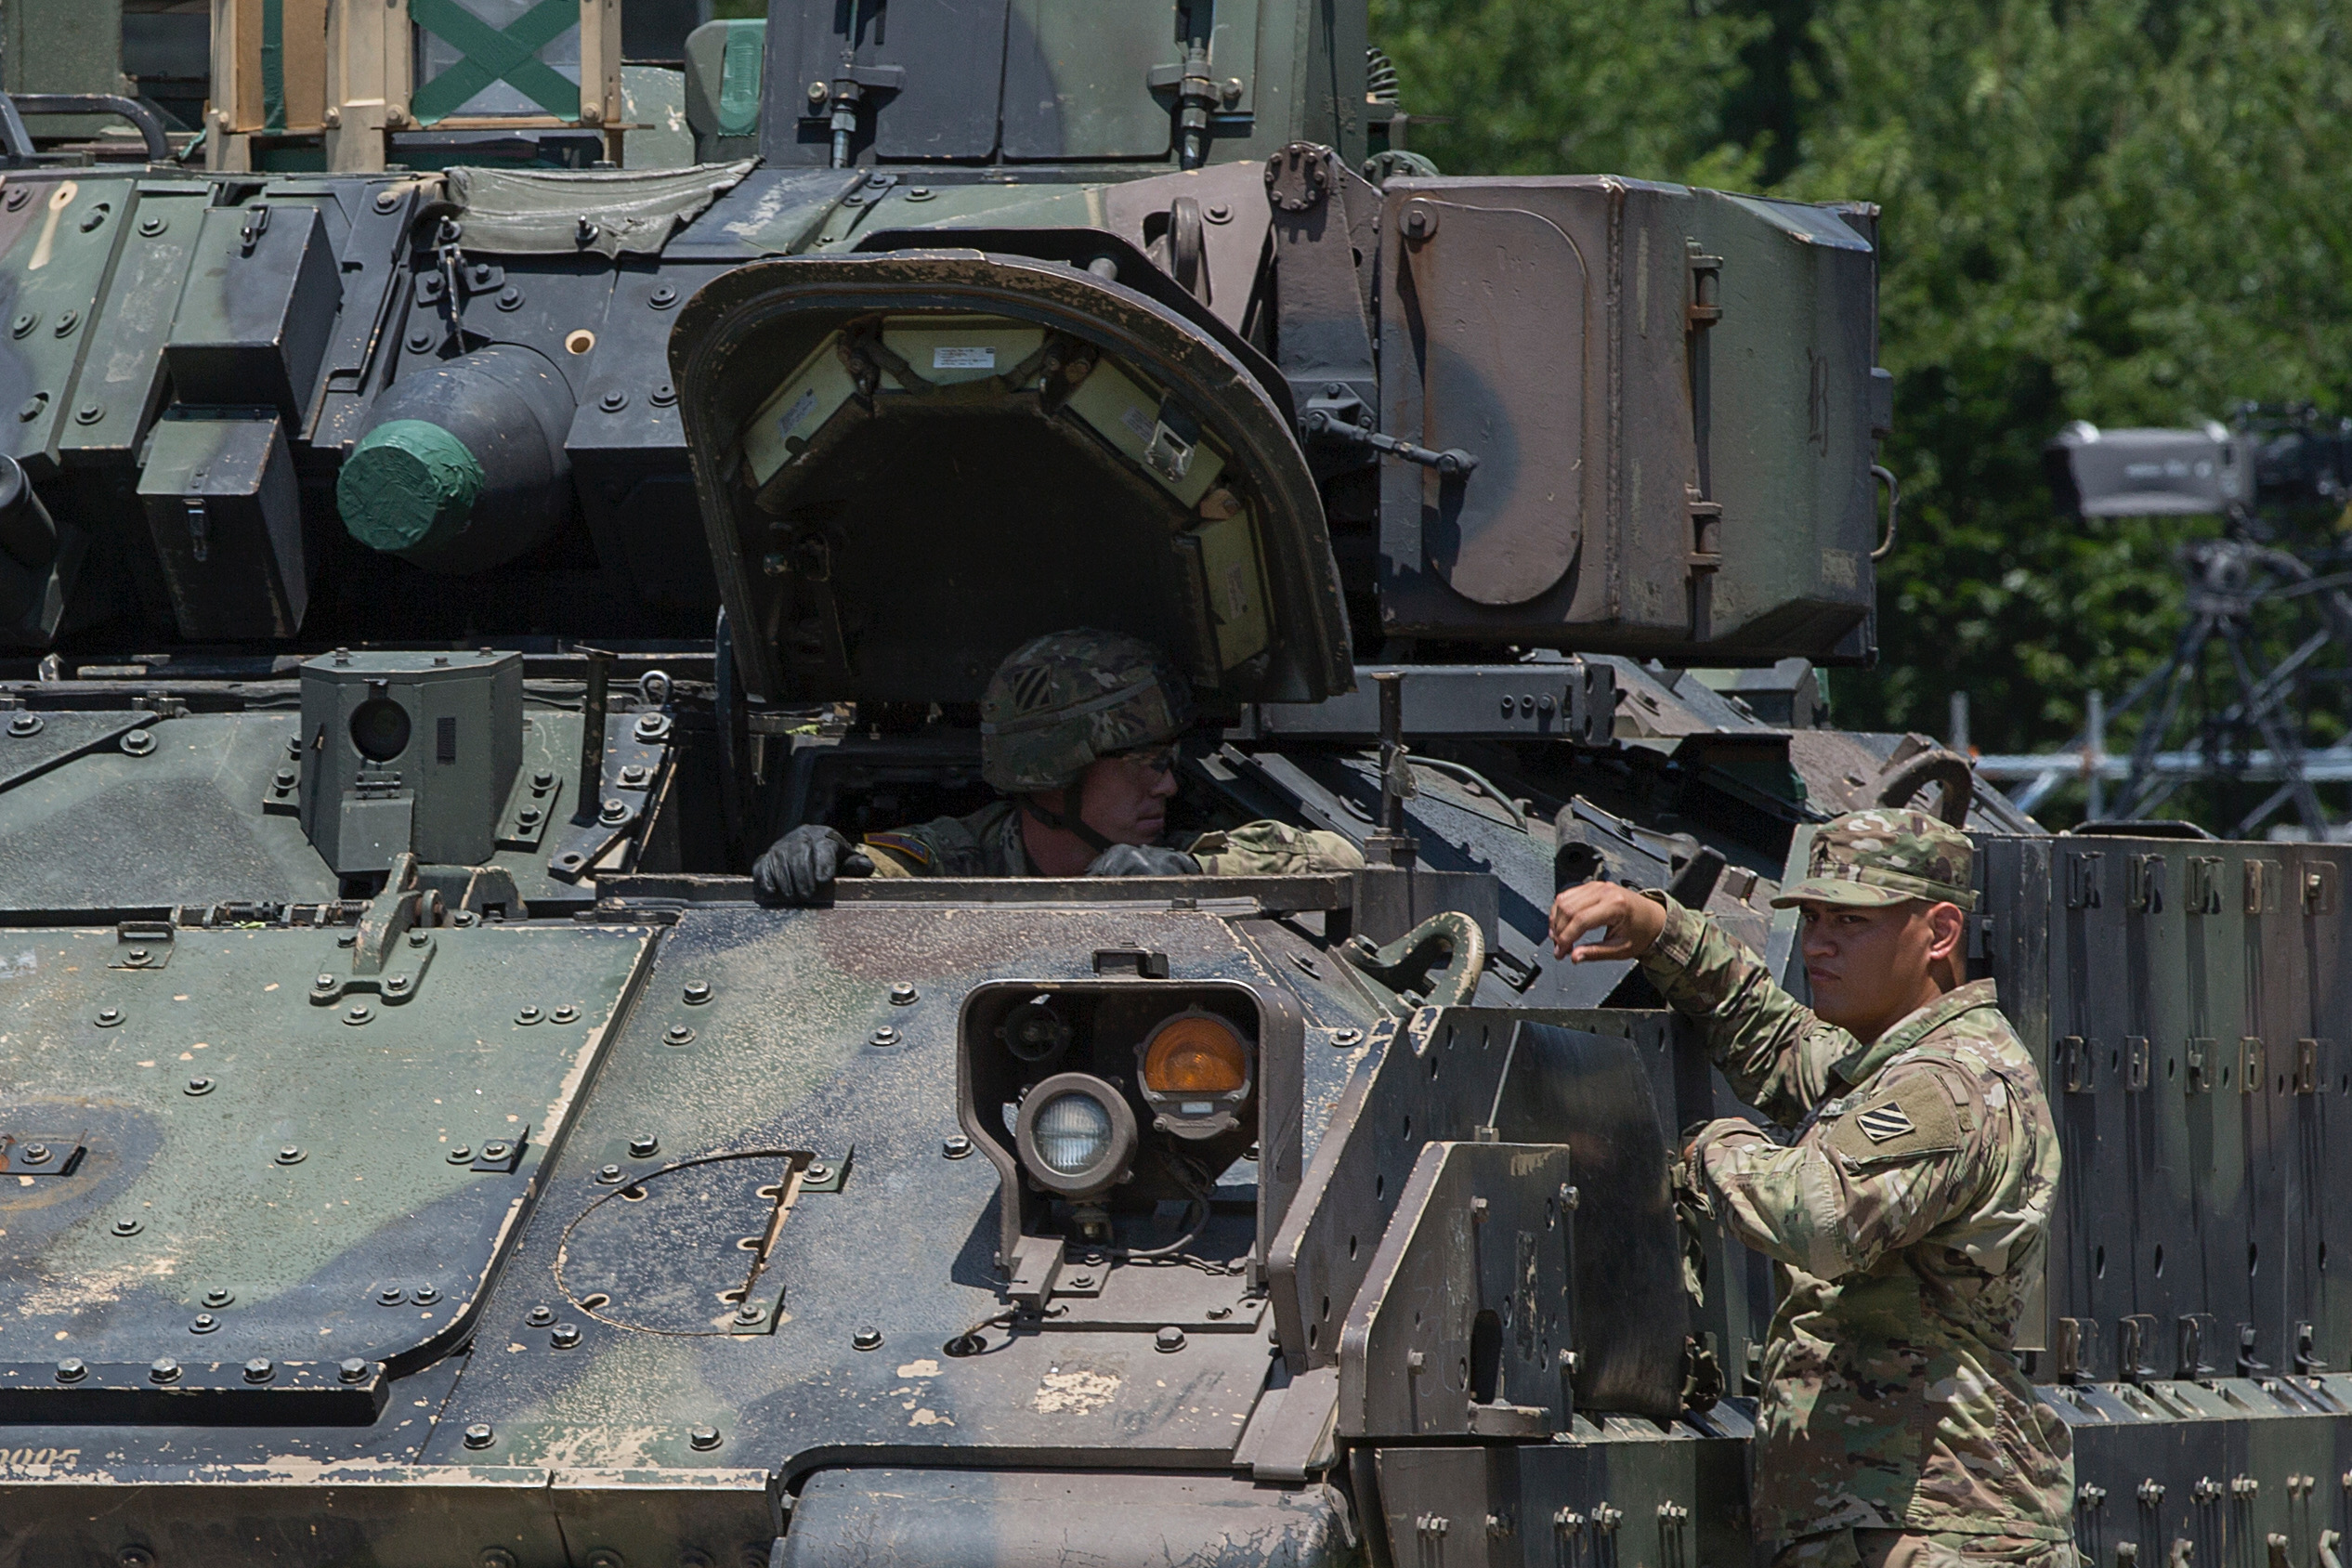 A member of the US military (L) inside a Bradley Fighting Vehicle speaks with another member on July 3, 2019 ahead of the Salute to America at the Lincoln Memorial on the National Mall in Washington, DC.